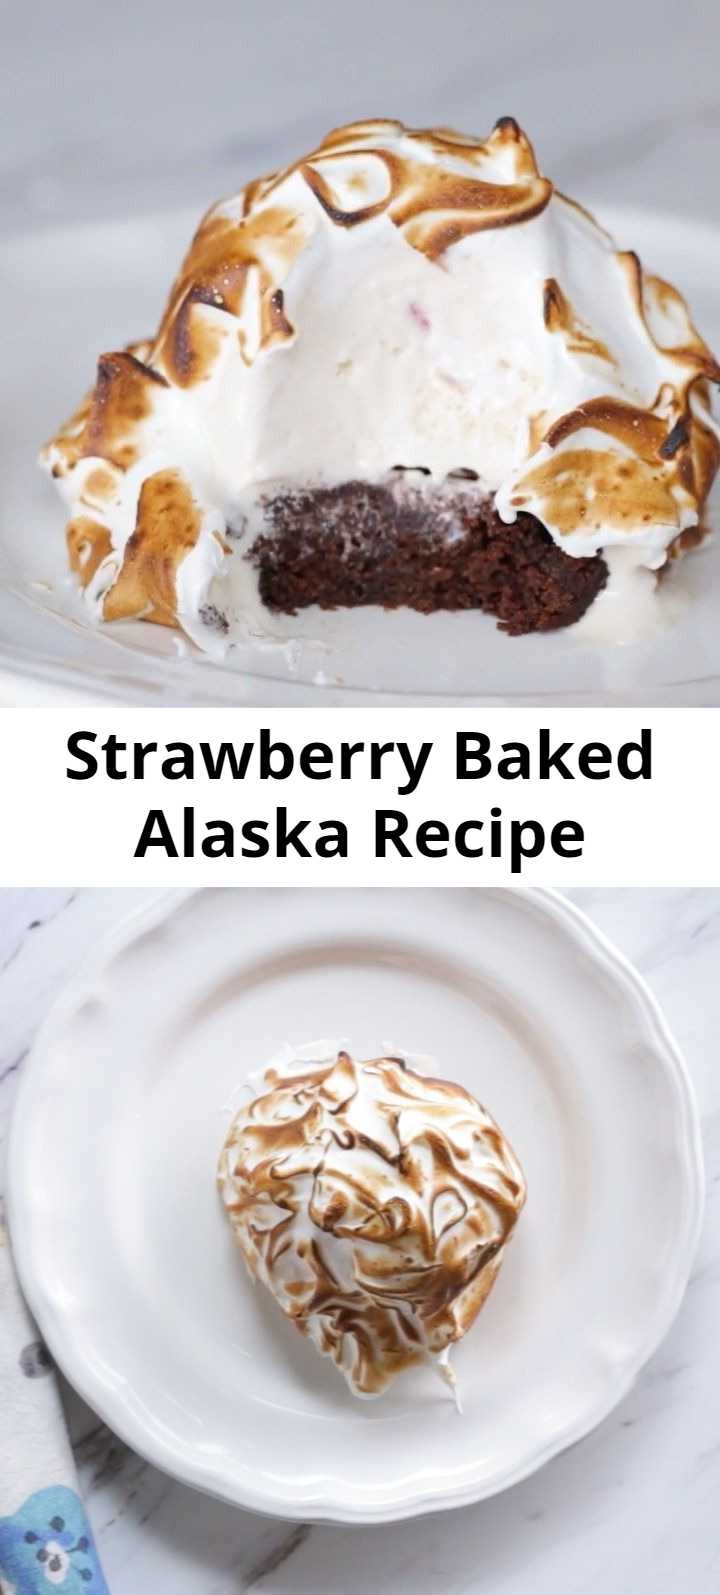 Strawberry Baked Alaska Recipe - Made with fresh fruit, this creamy dessert is berry delicious. A brownie base and a toasted cream top makes it easy to impress with this dish.